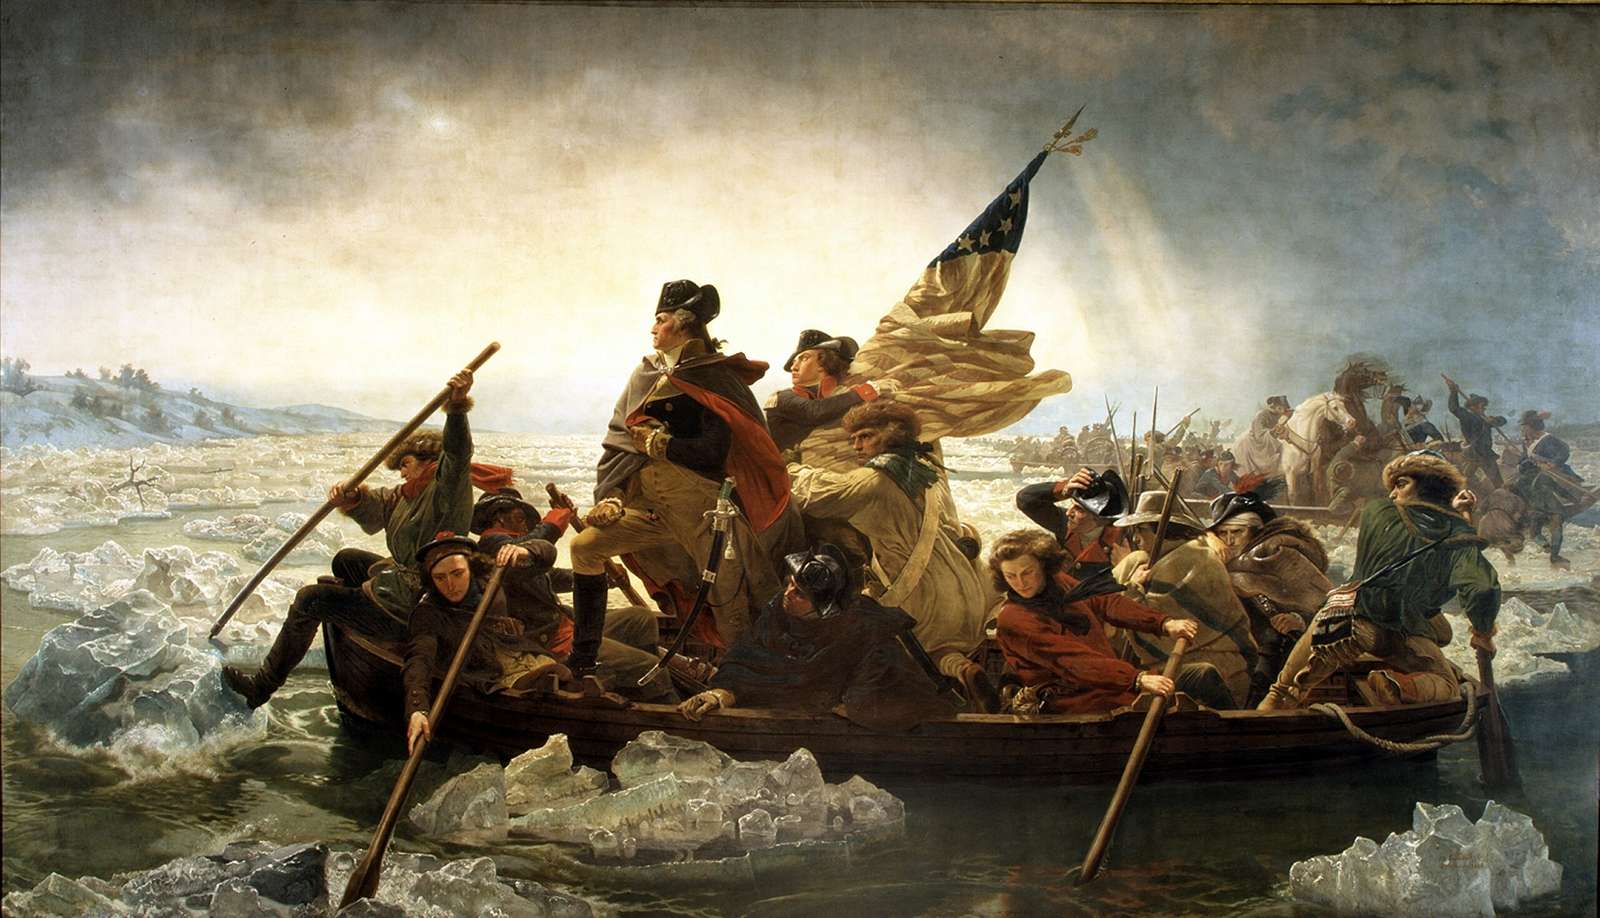 Washington's Crossing puzzle online from photo